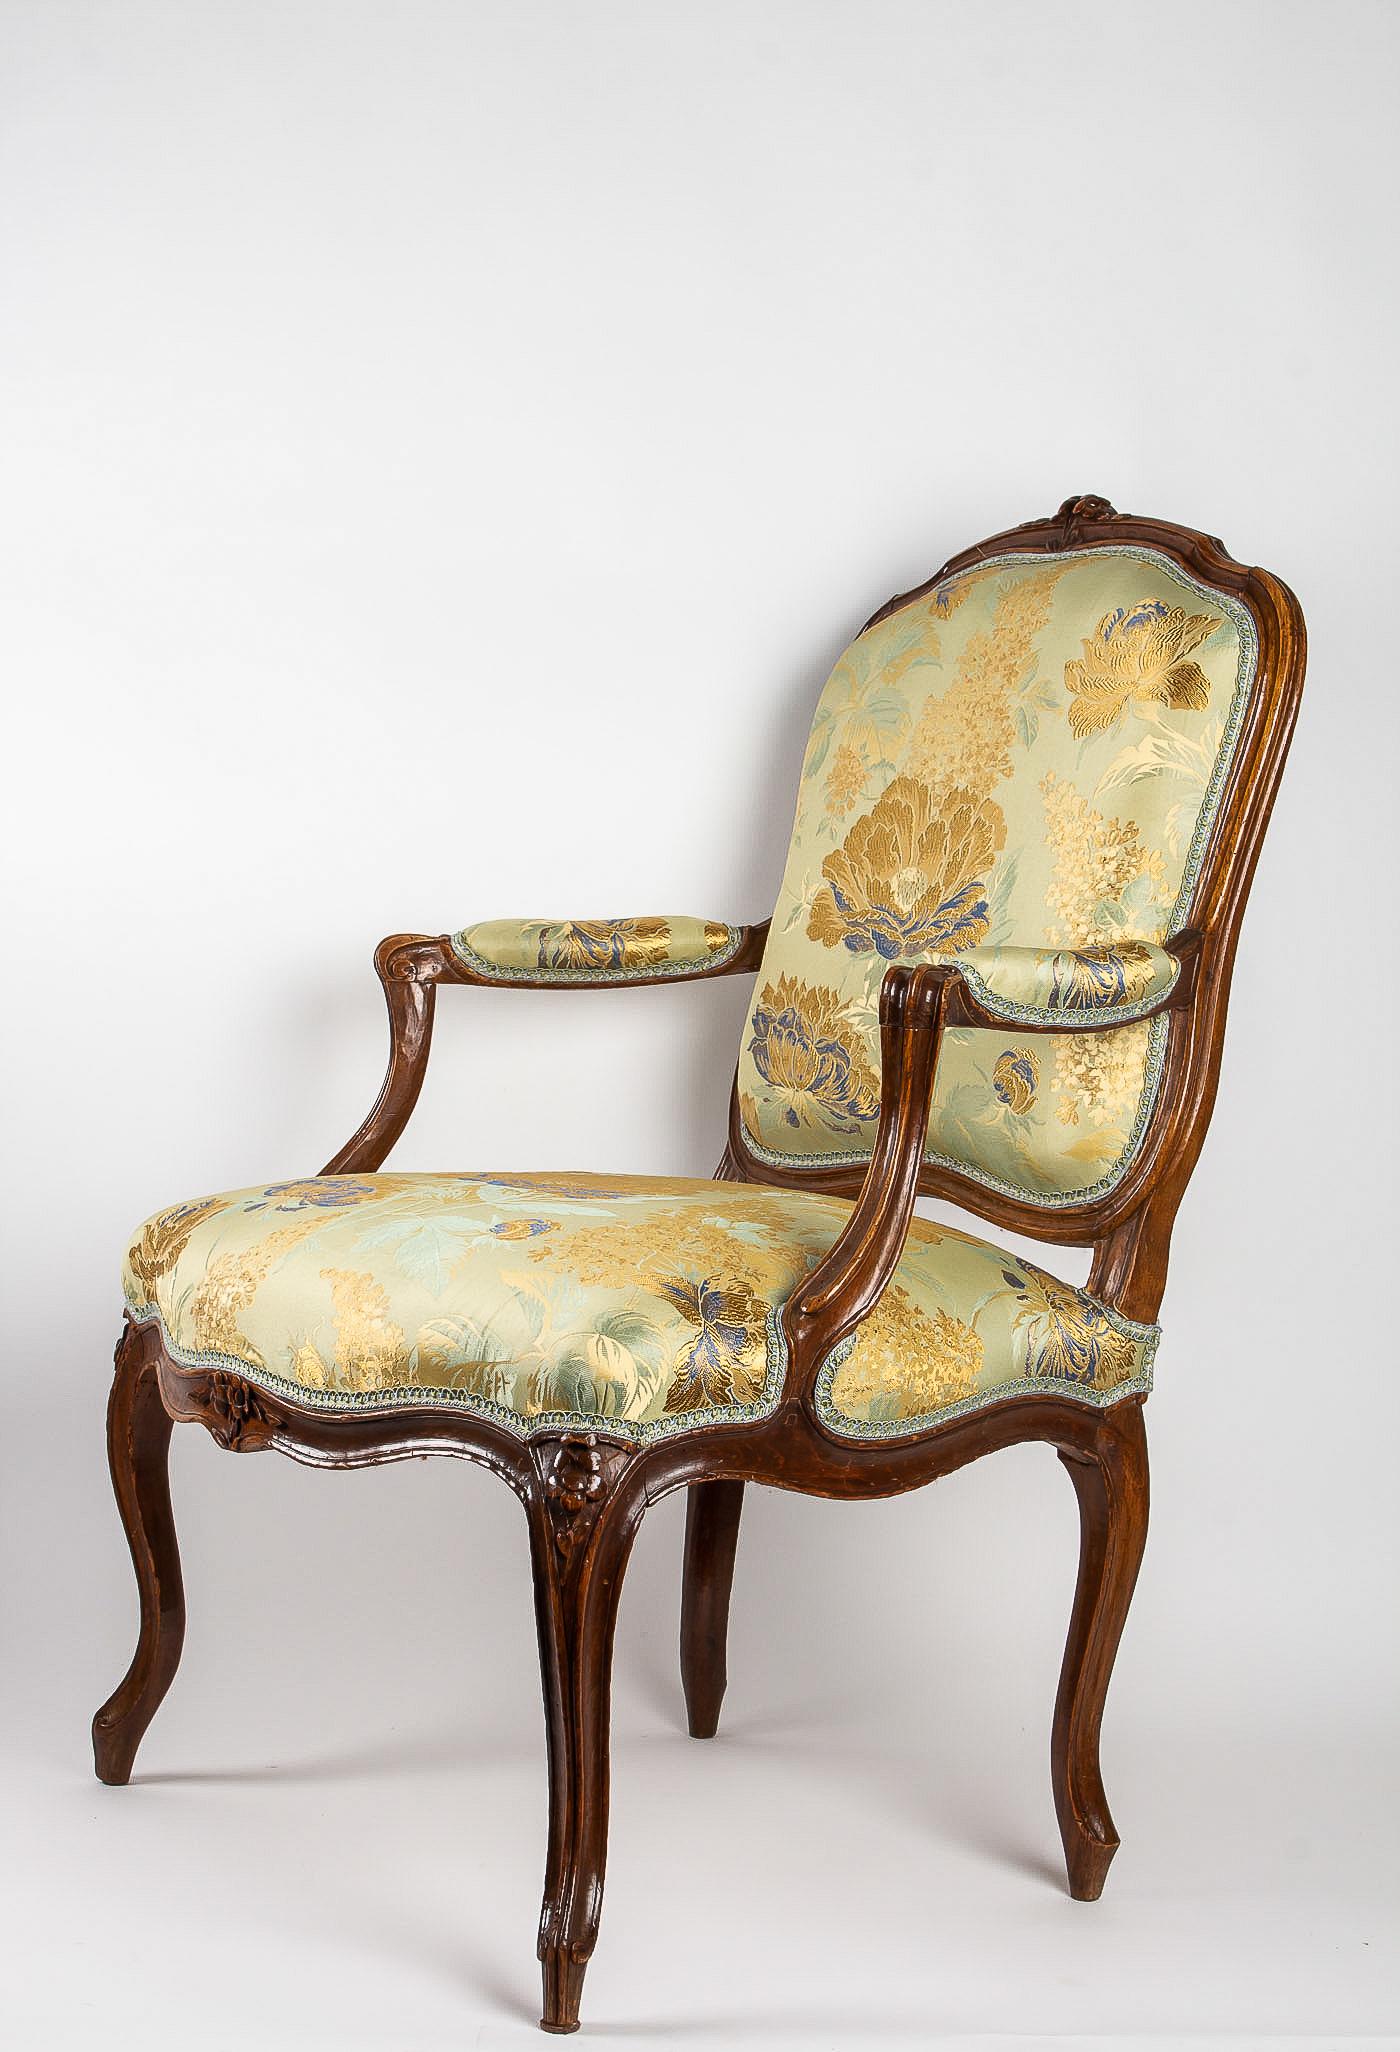 Louis XV Period Set of 4 of Large Armchairs, circa 1766-1770 by Louis Delanois For Sale 3